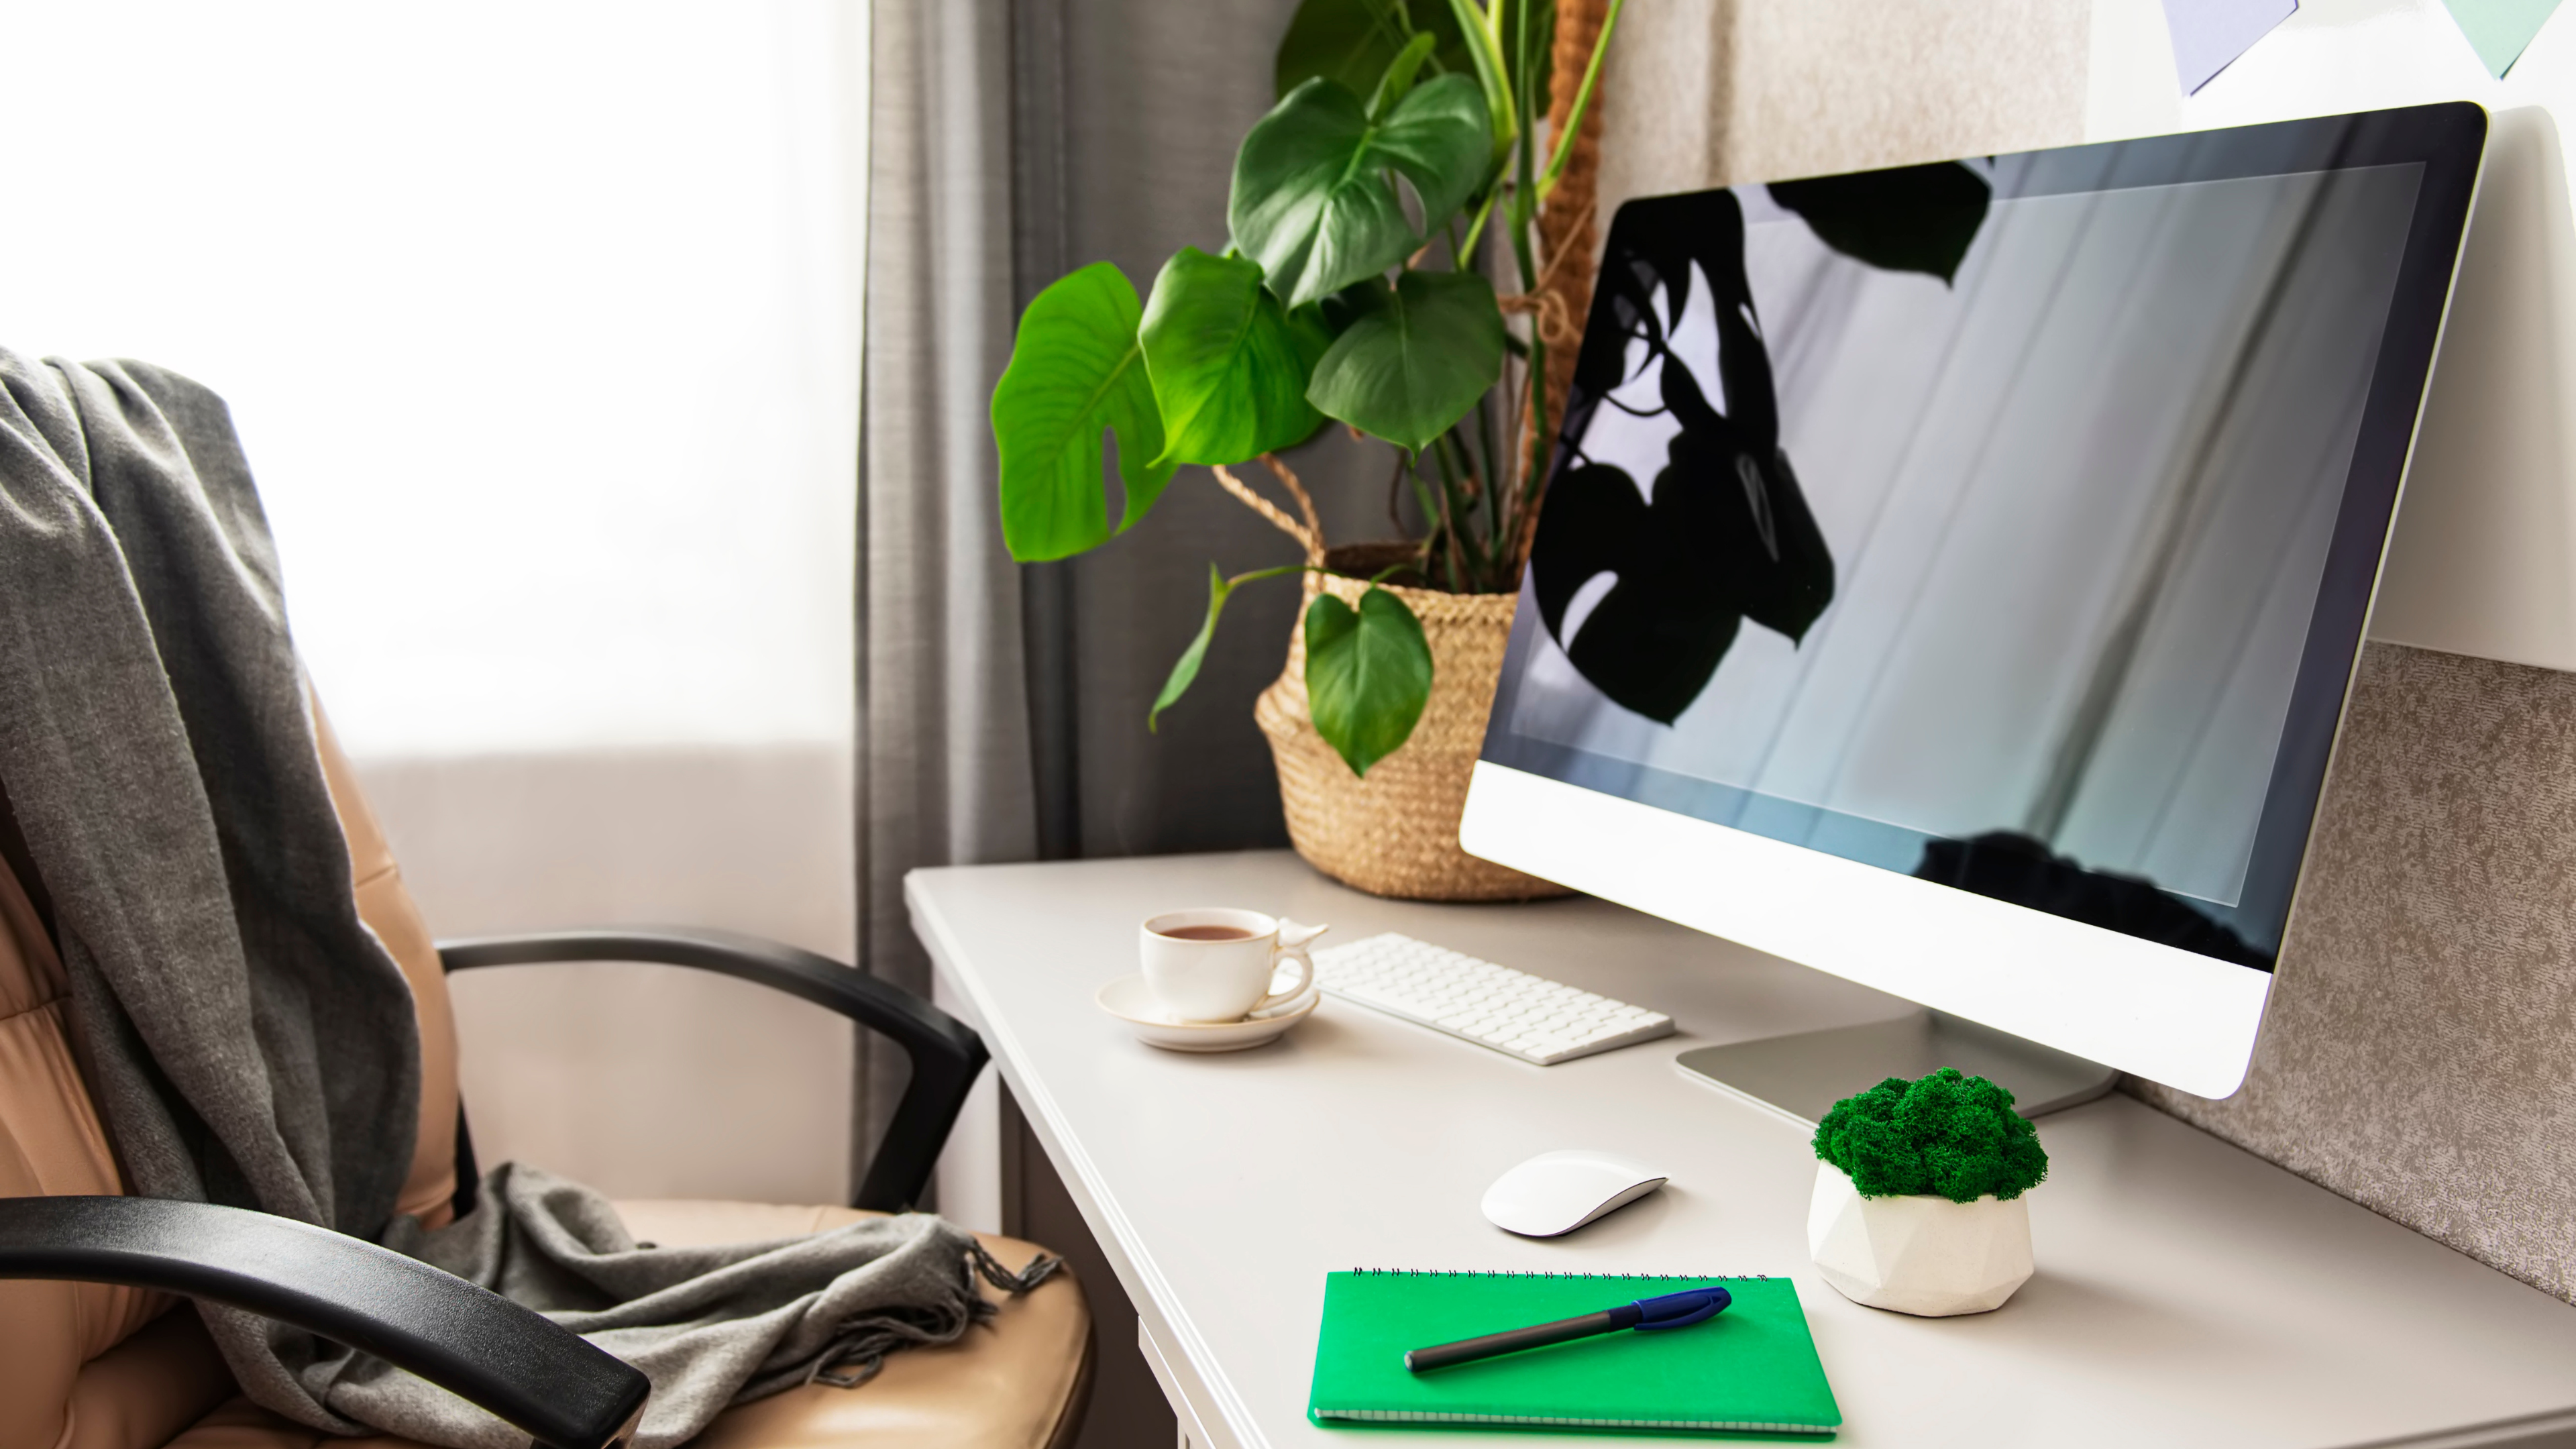 3 Benefits of Having Plants in Your Office